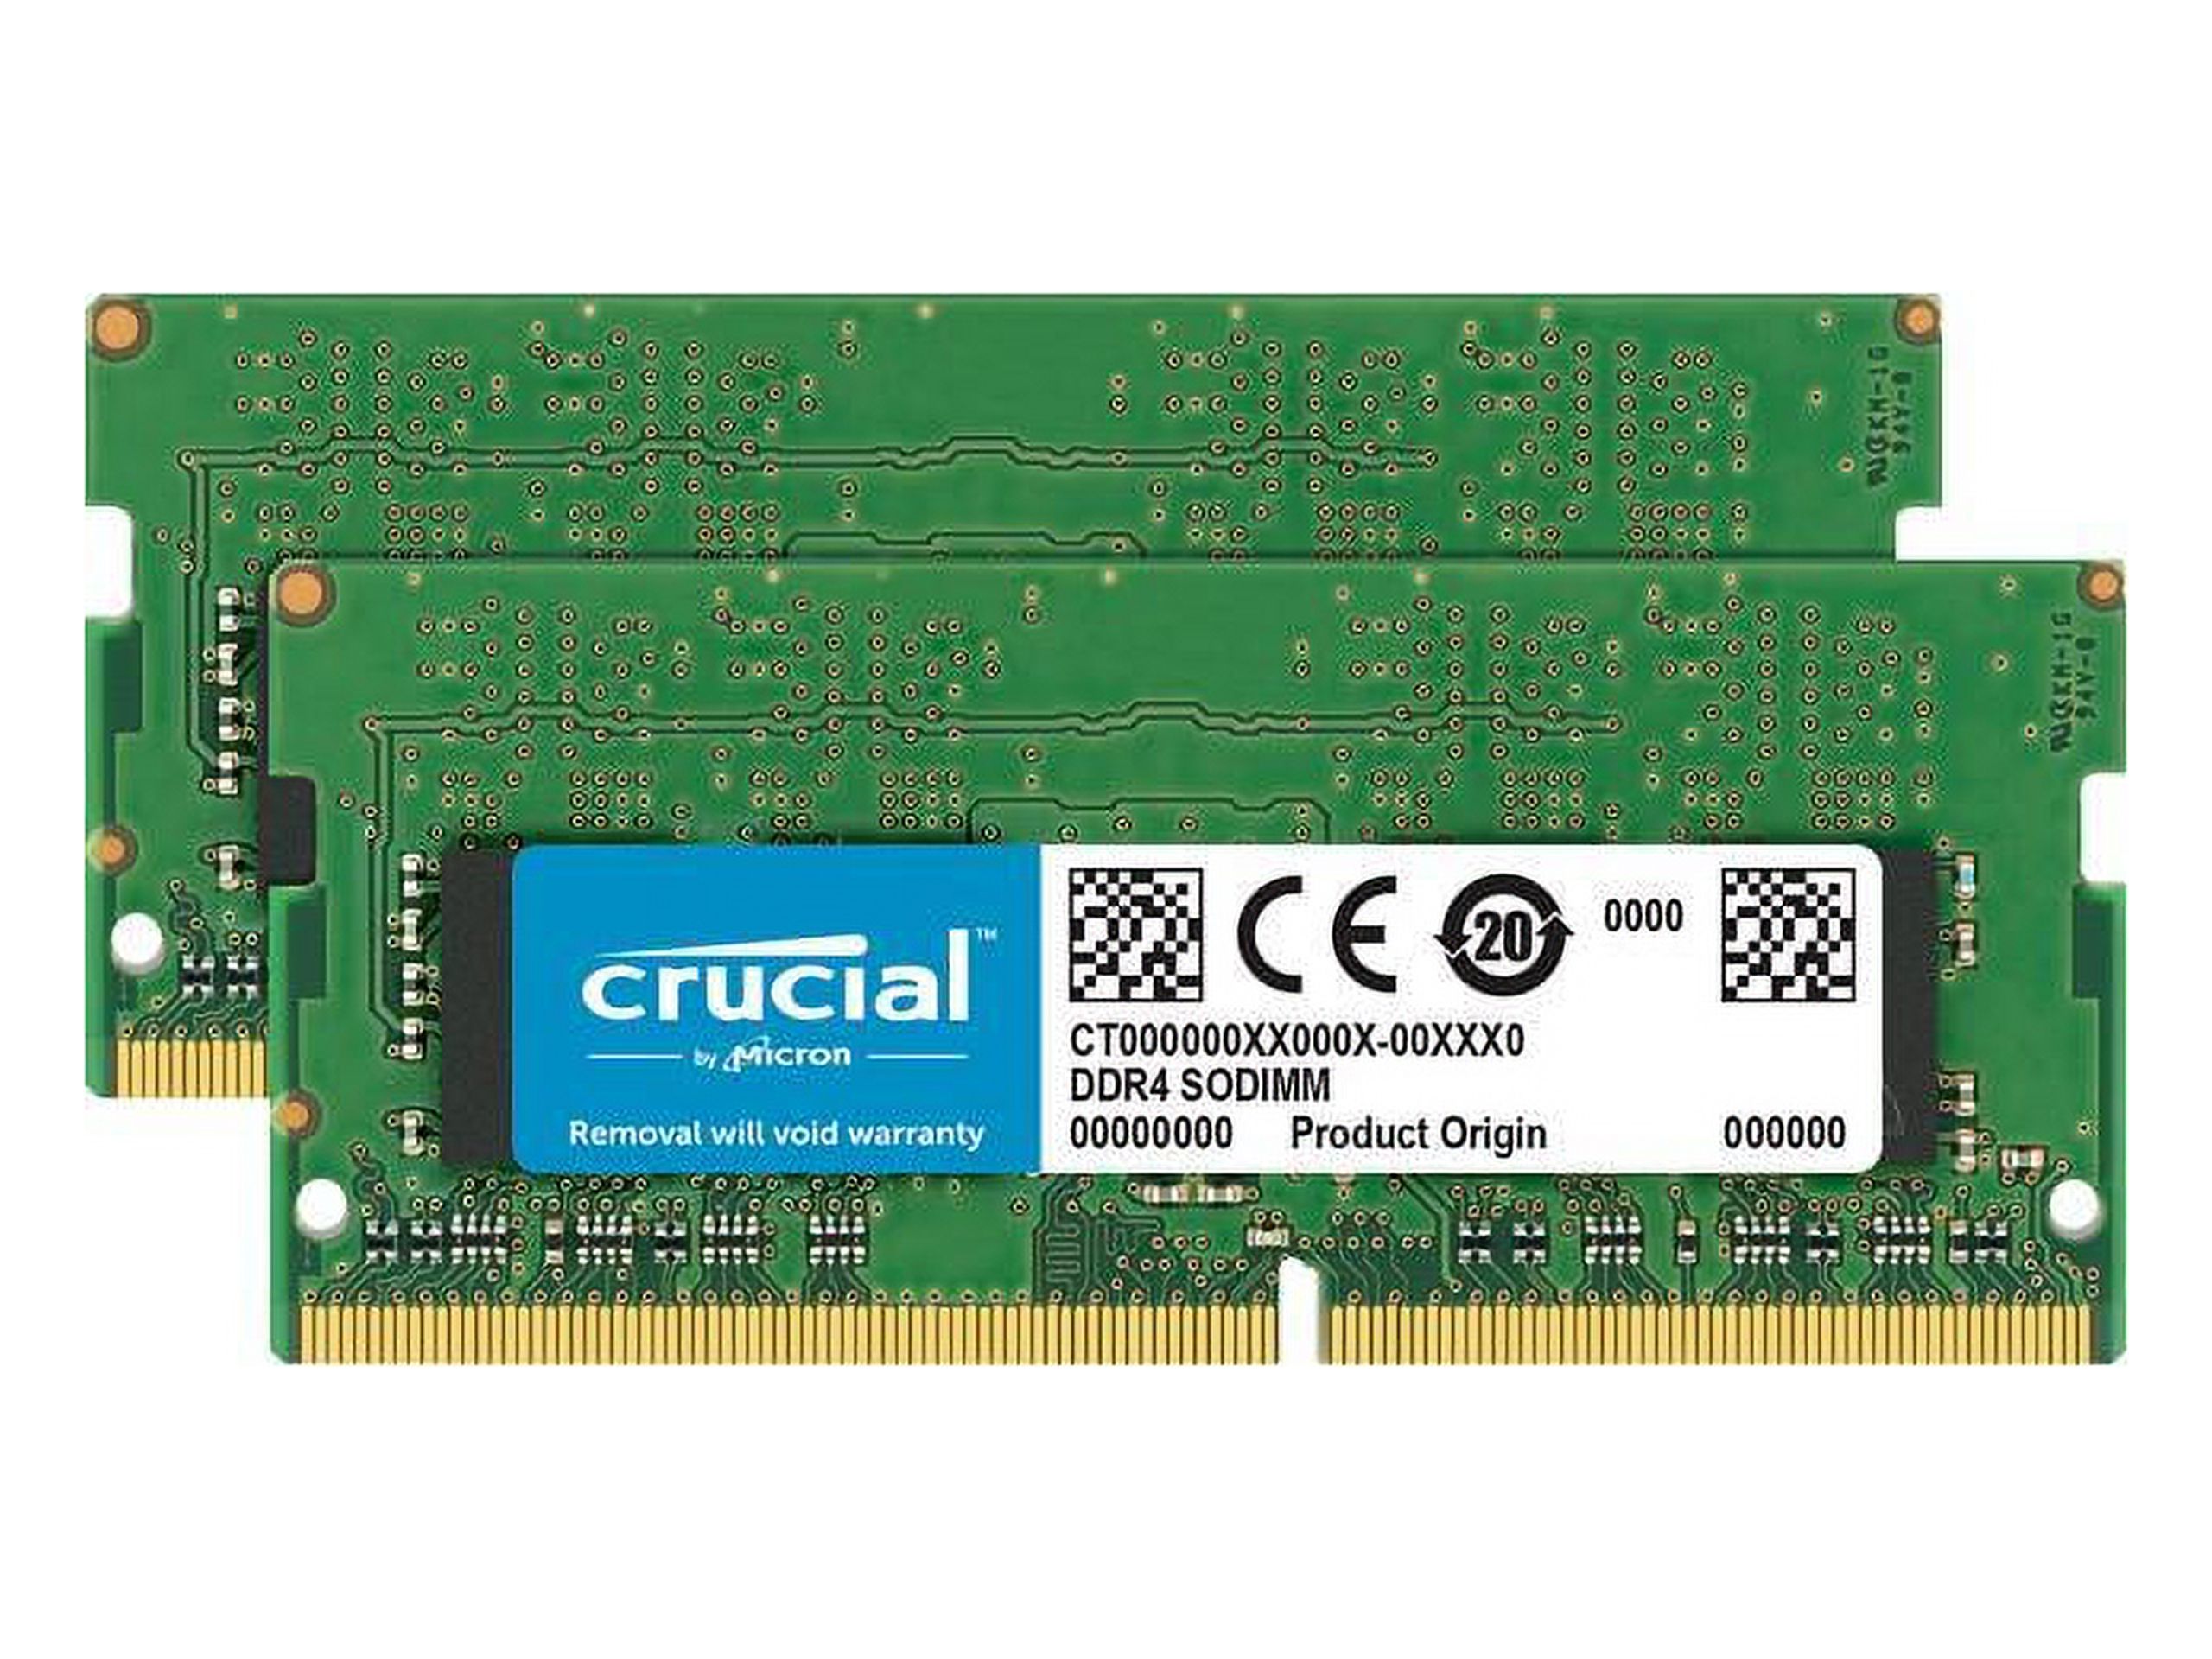 Crucial 32GB Kit (16GBx2) DDR4 2400 MT/s (PC4-19200) 260-Pin SODIMM Memory - CT2K16G4SFD824A - image 1 of 8